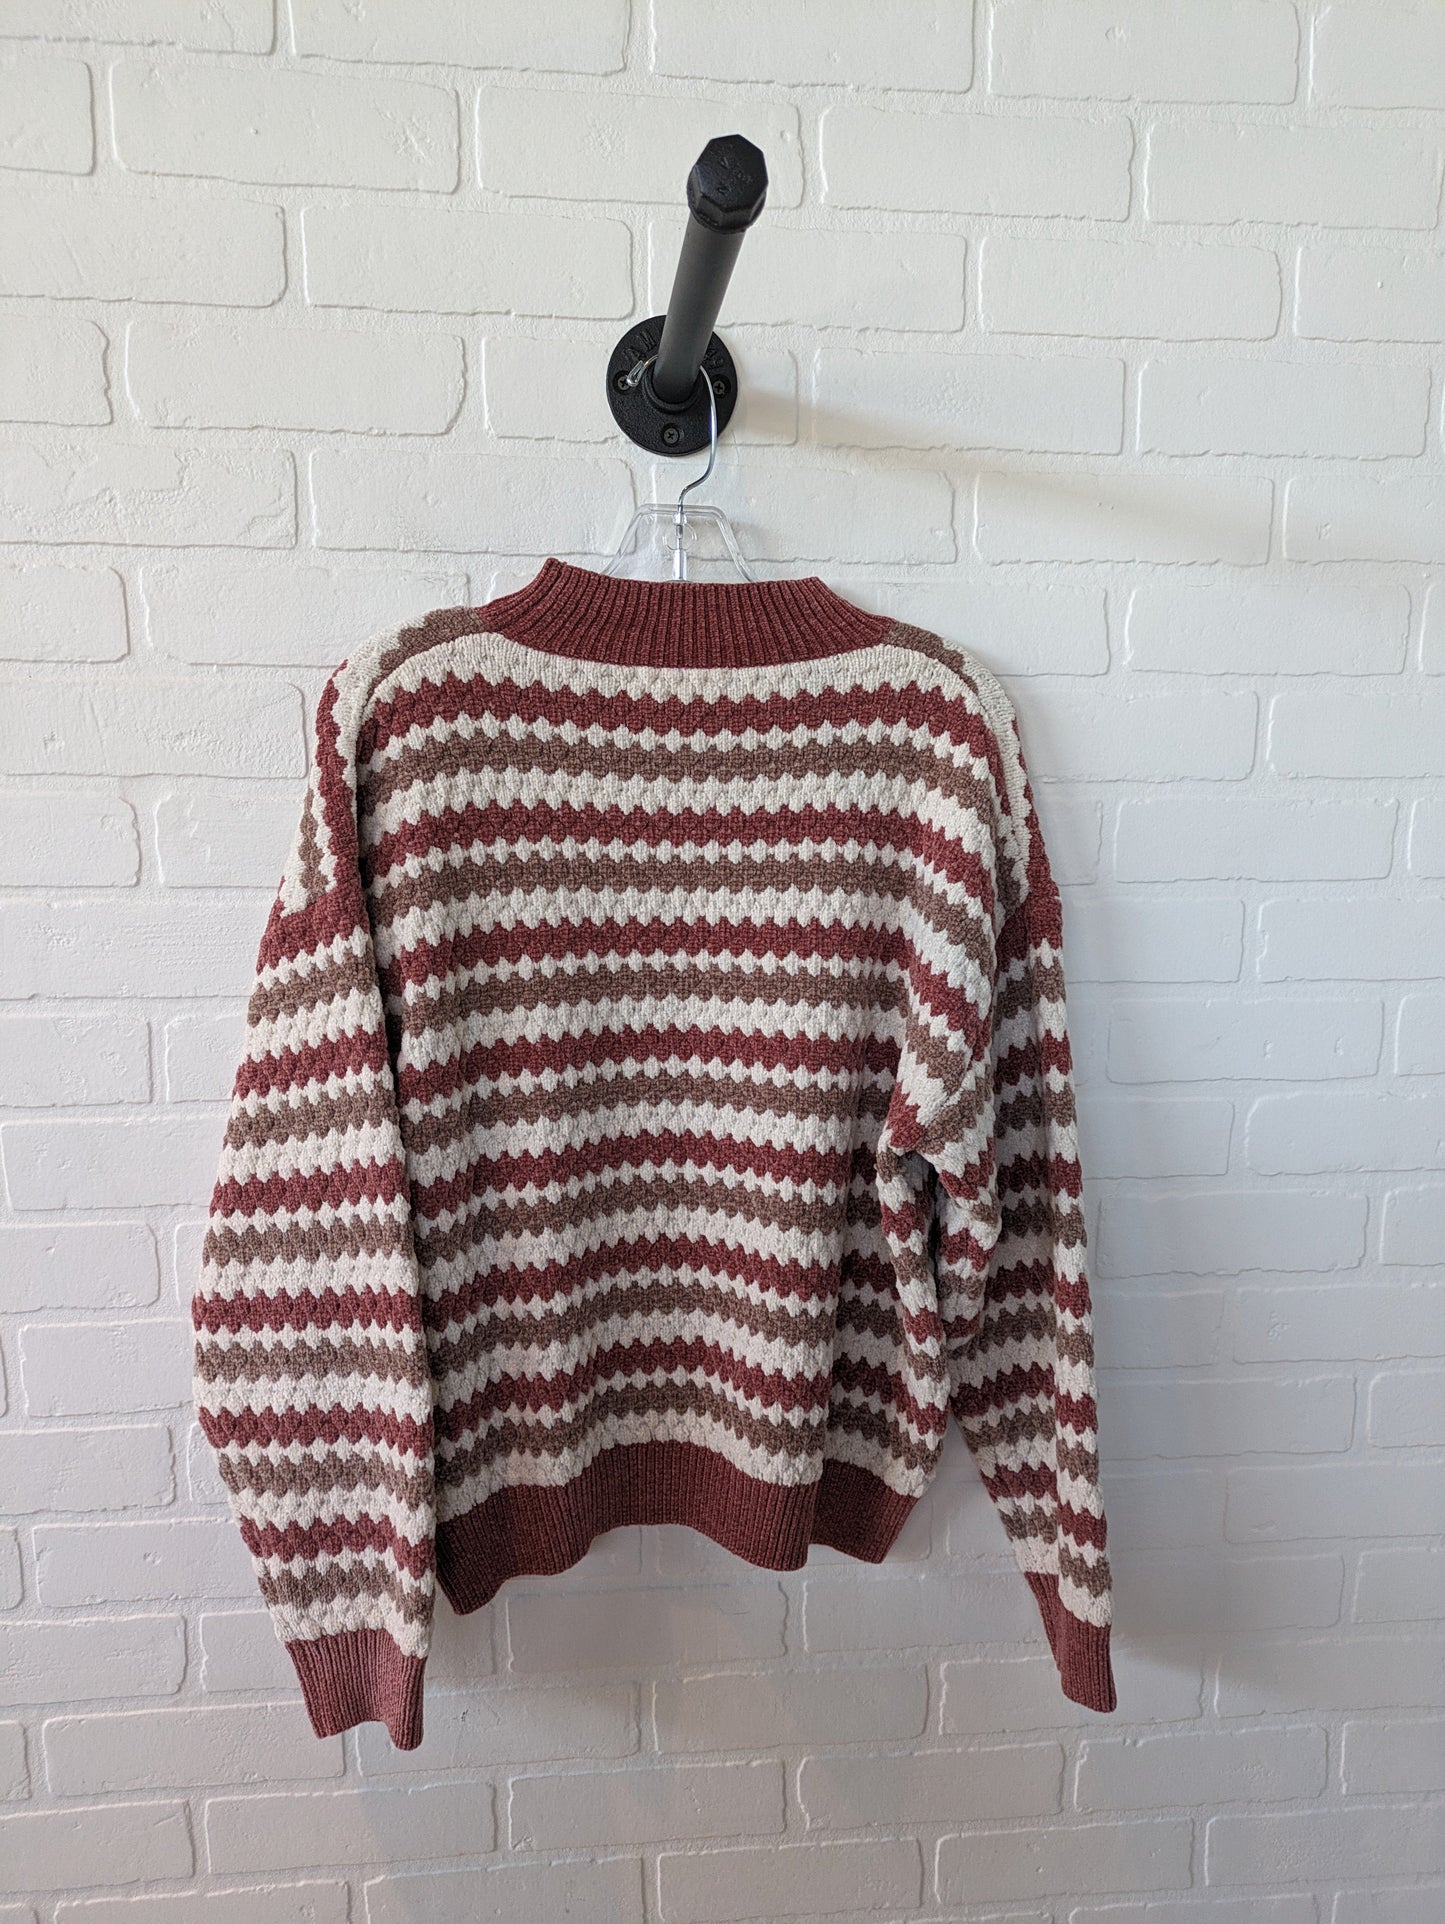 Sweater By Line & Dot  Size: M